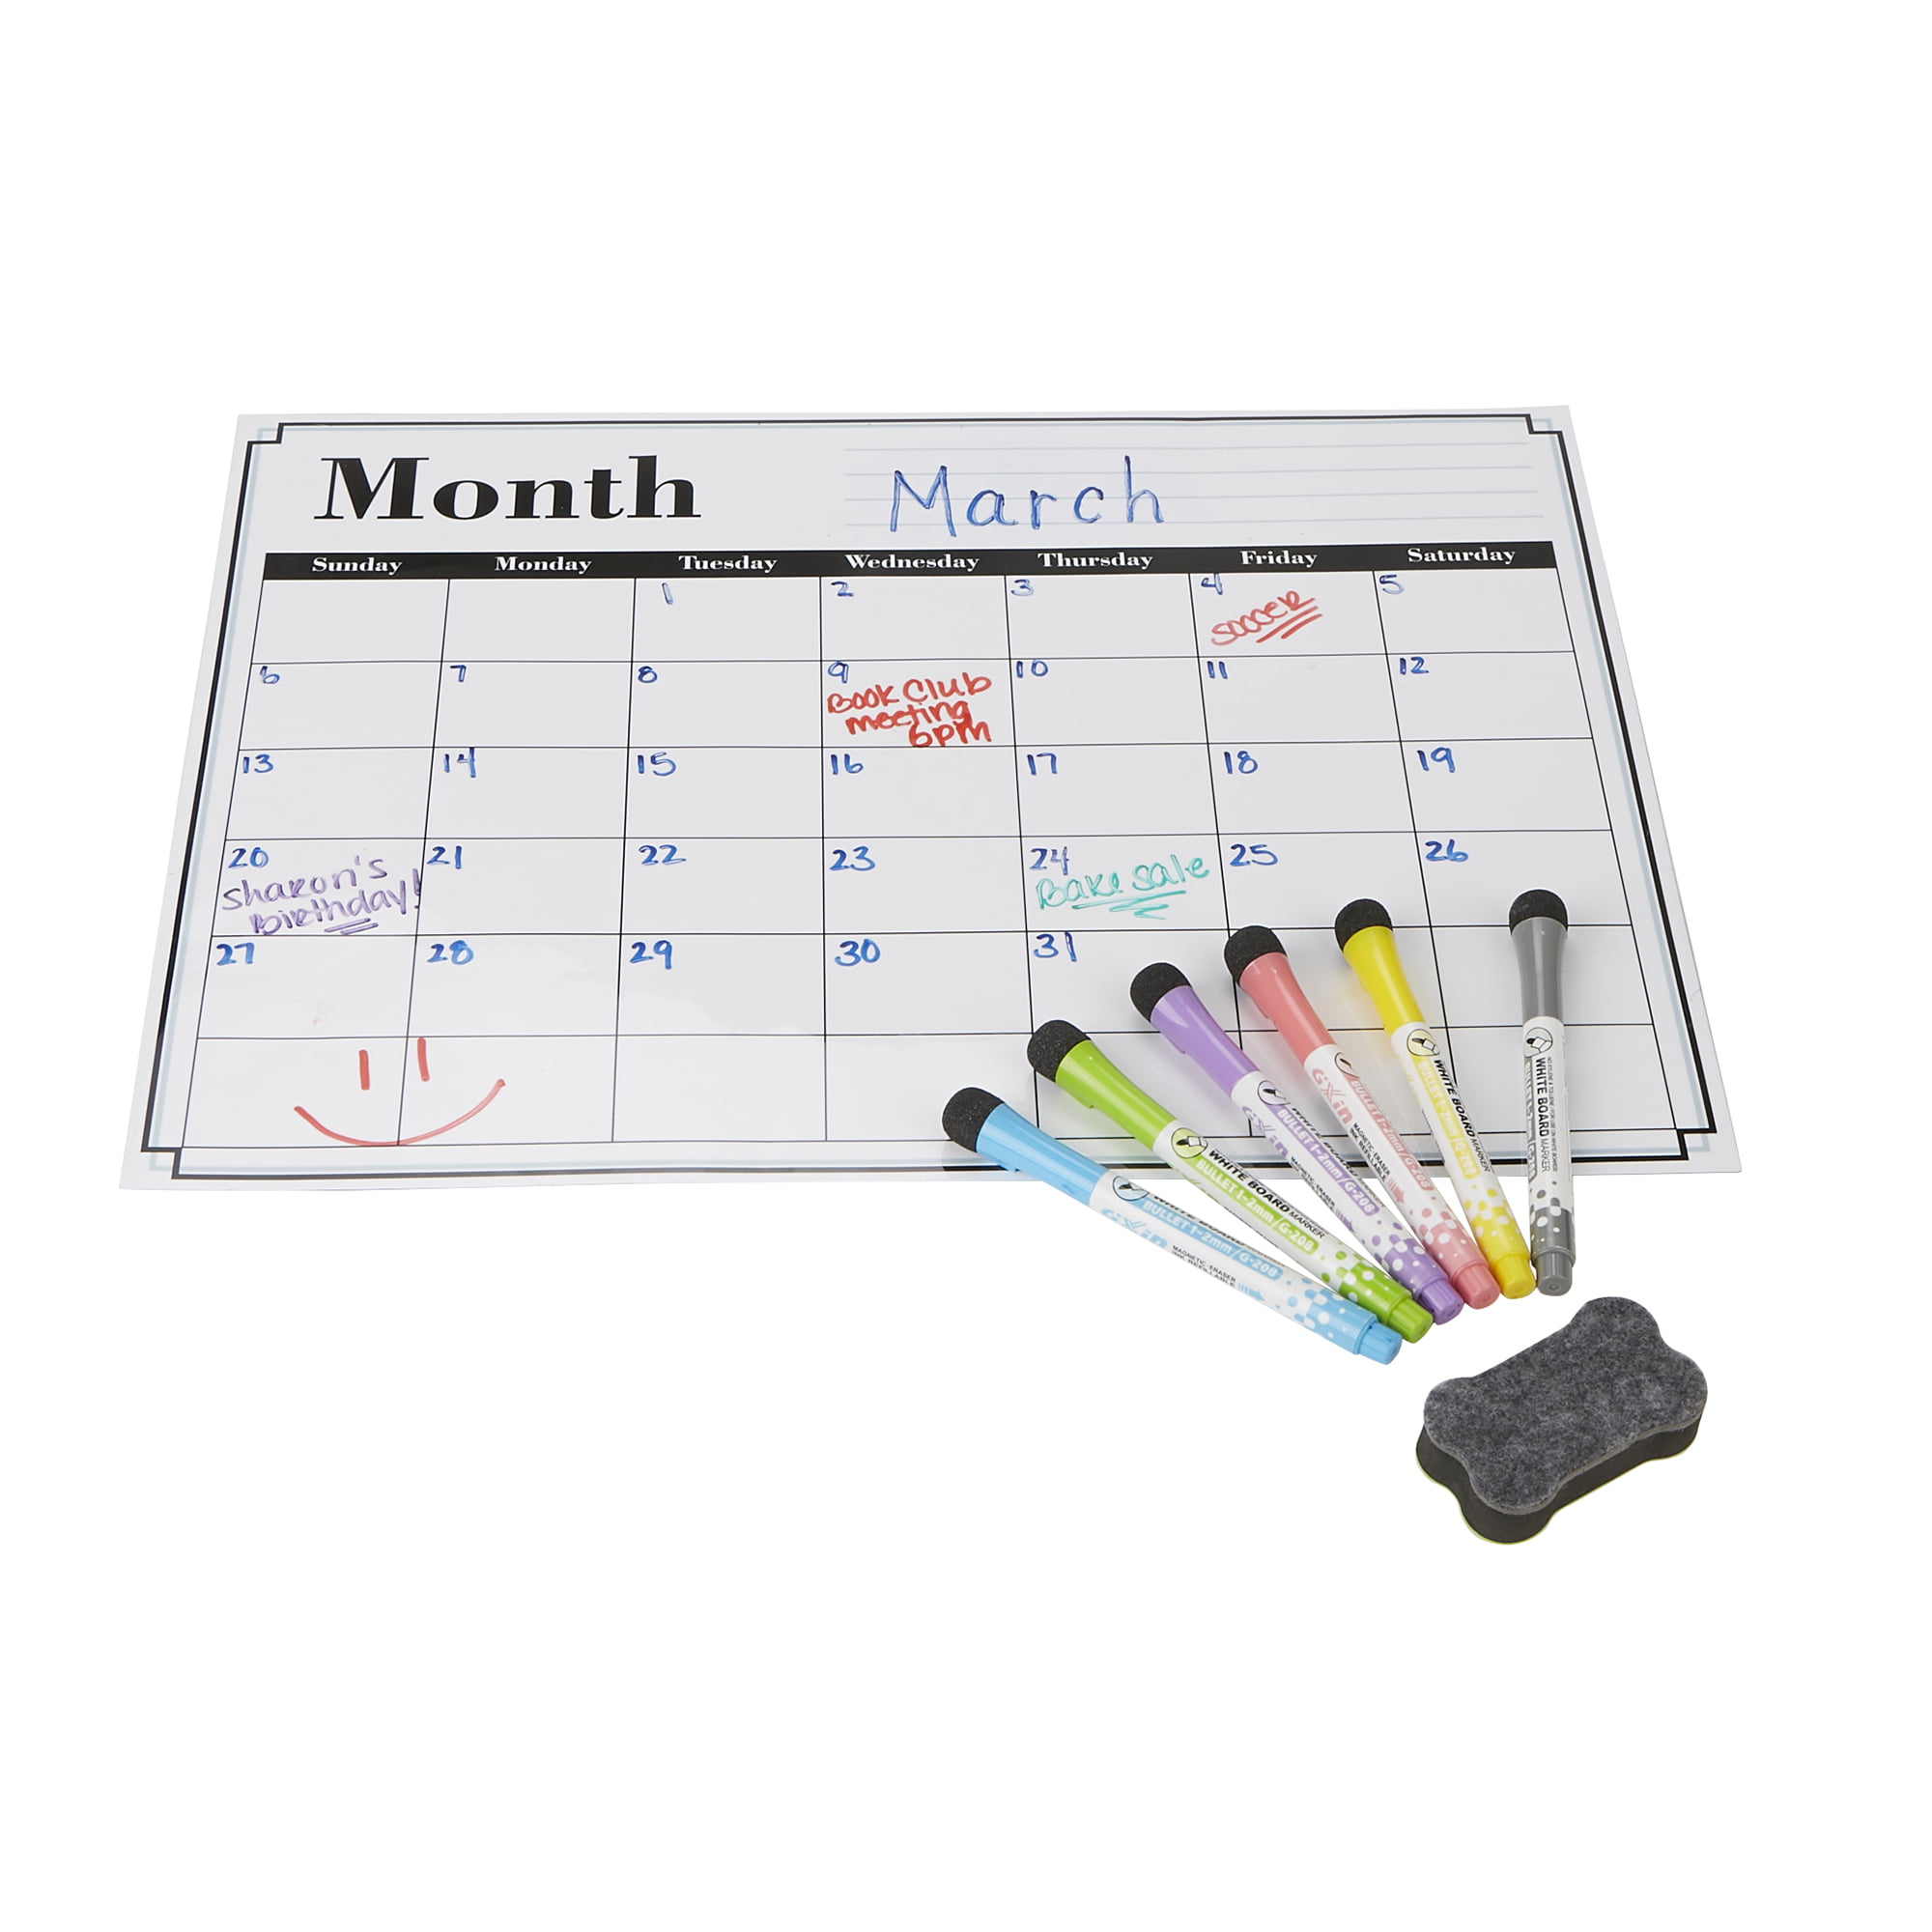 reusable-magnetic-dry-erase-calendar-weekly-monthly-planner-whiteboard